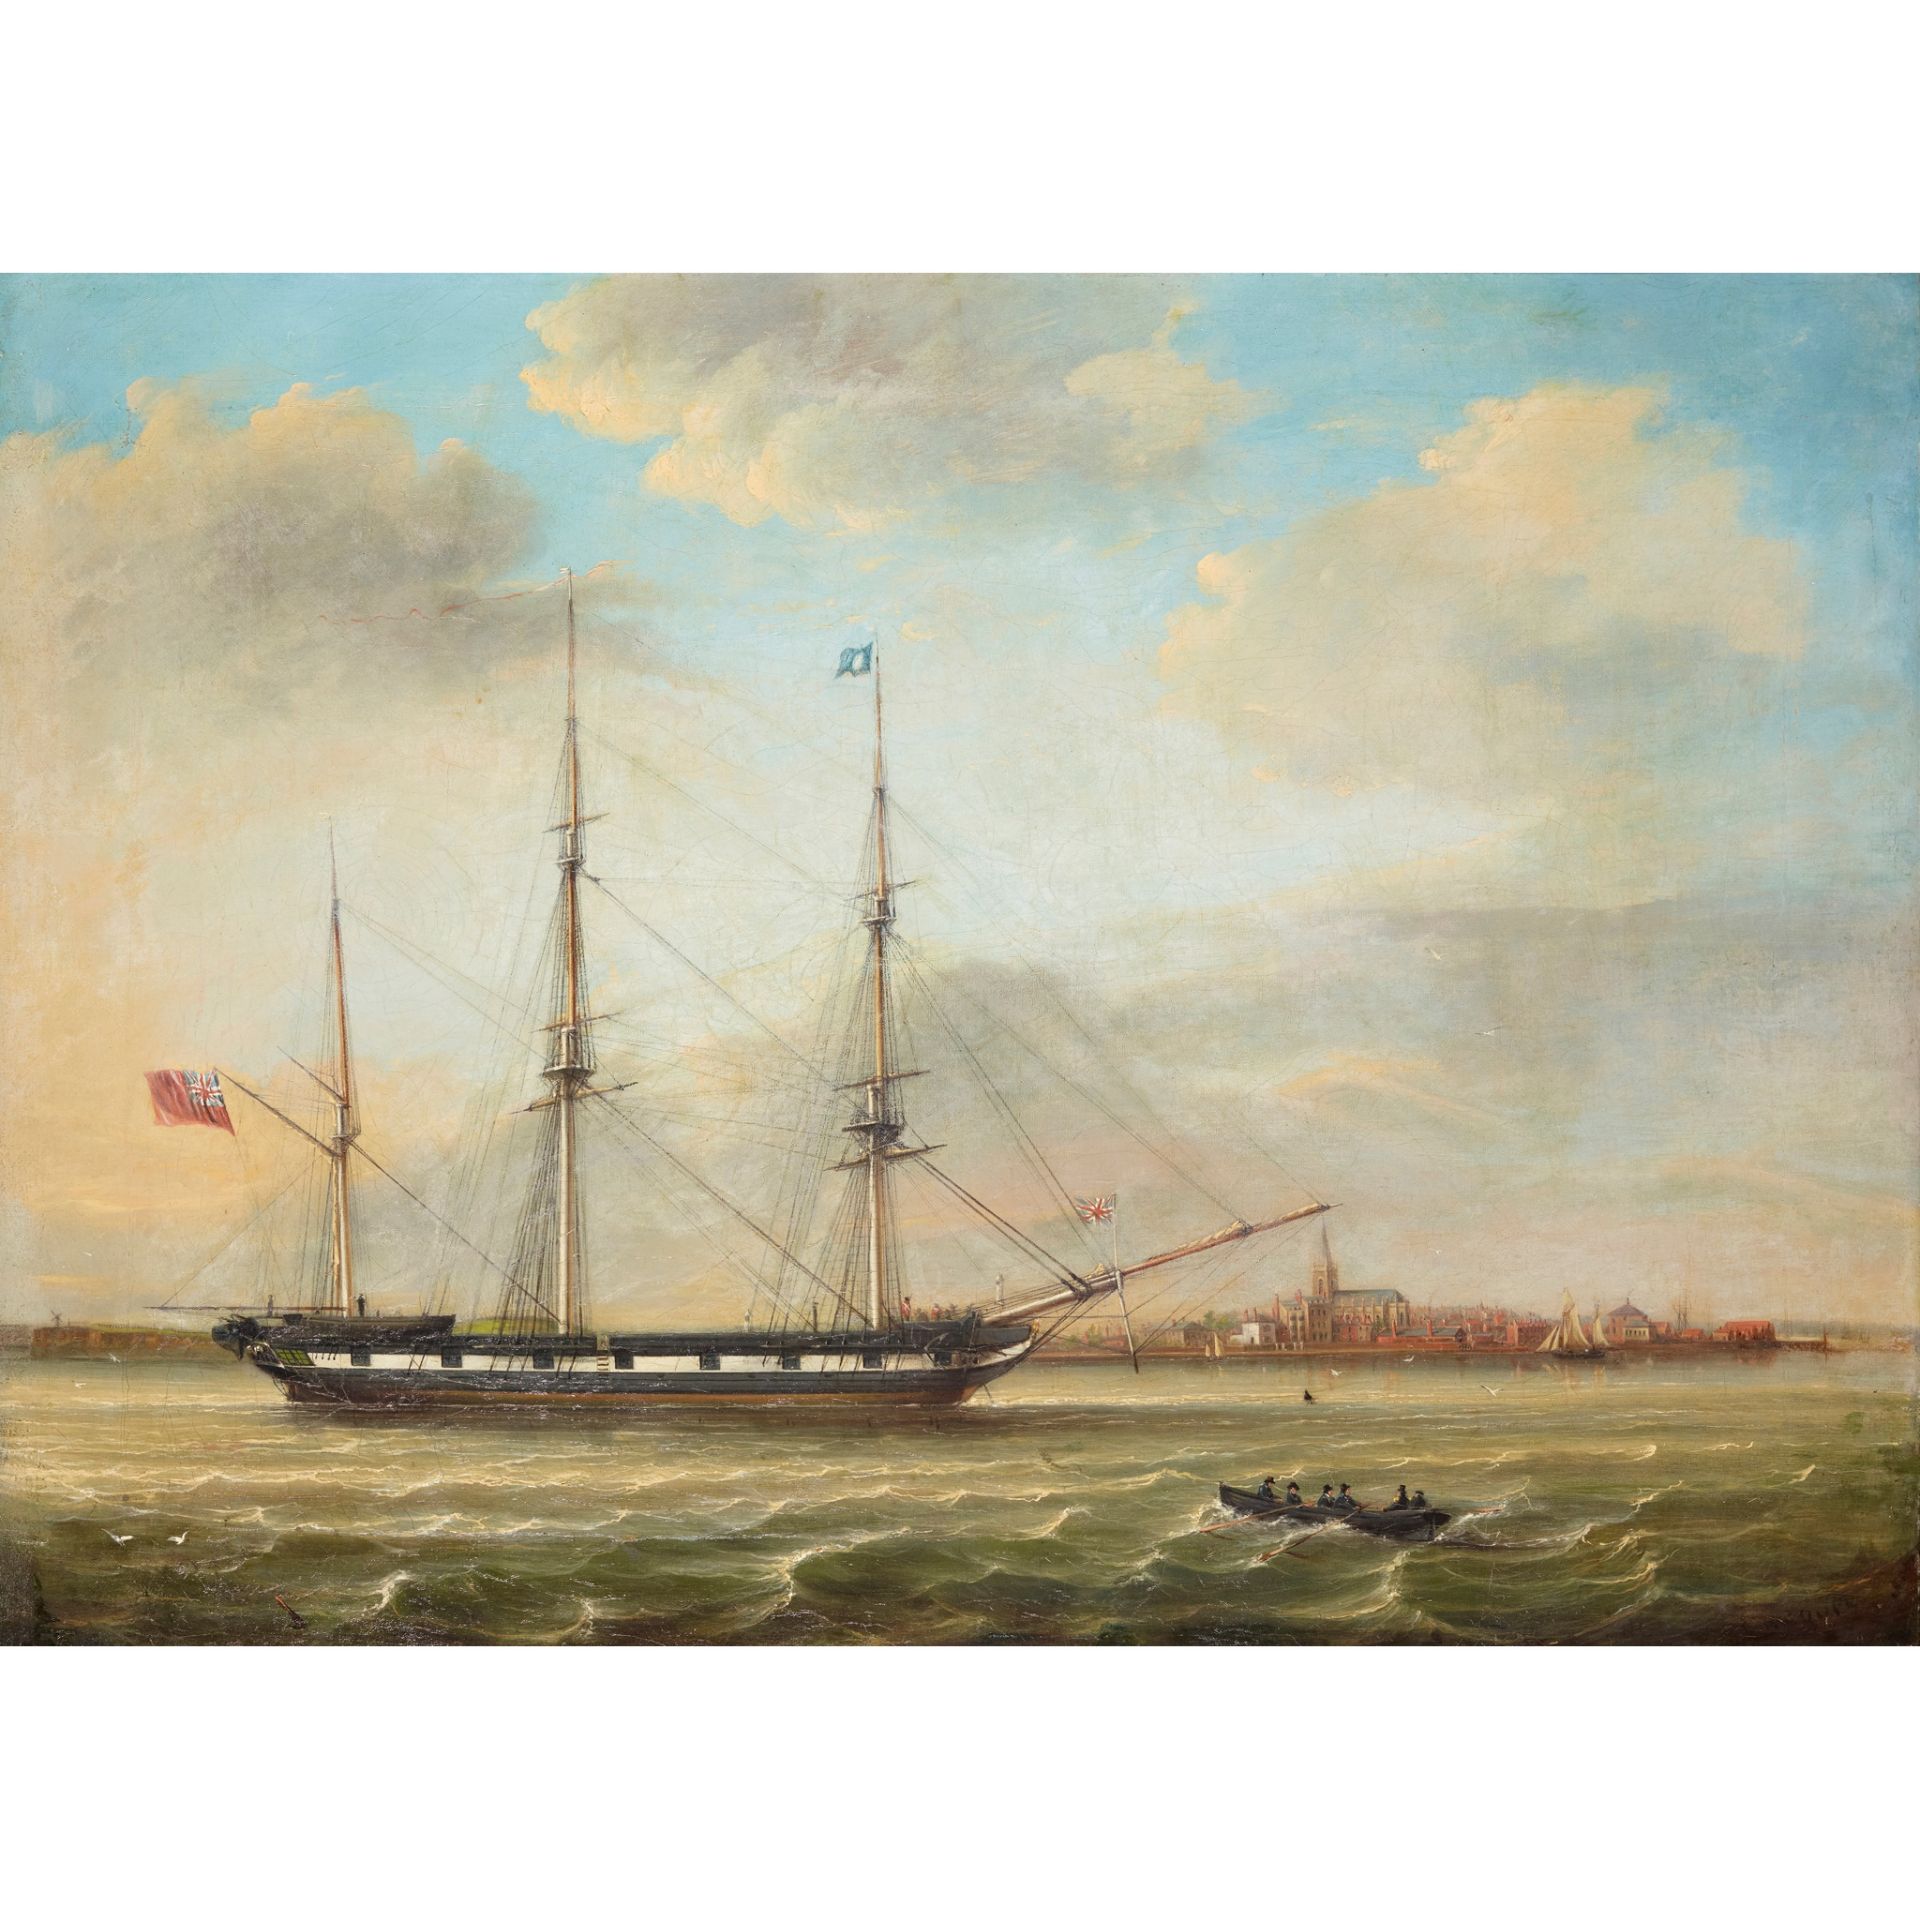 CHARLES GREGORY (BRITISH 1810-1896) AN EAST-INDIAMAN OFF HARWICH